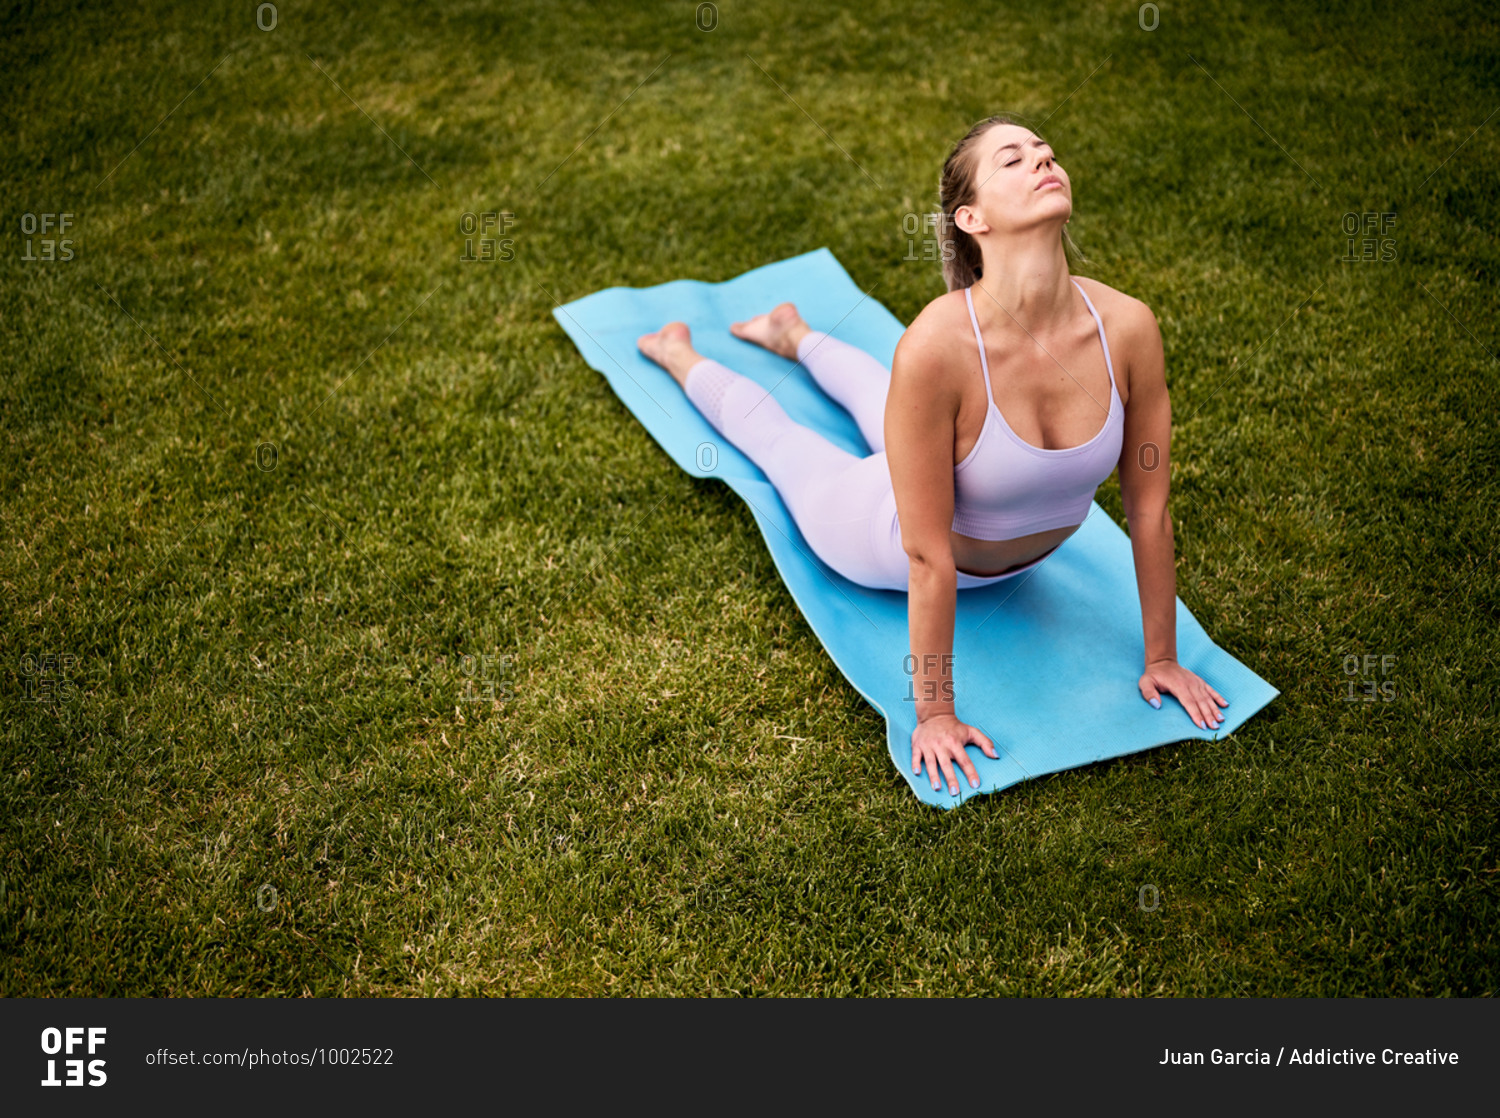 From above side view of peaceful female practicing yoga on mat in Bhujangasana with closed eyes on lawn in backyard